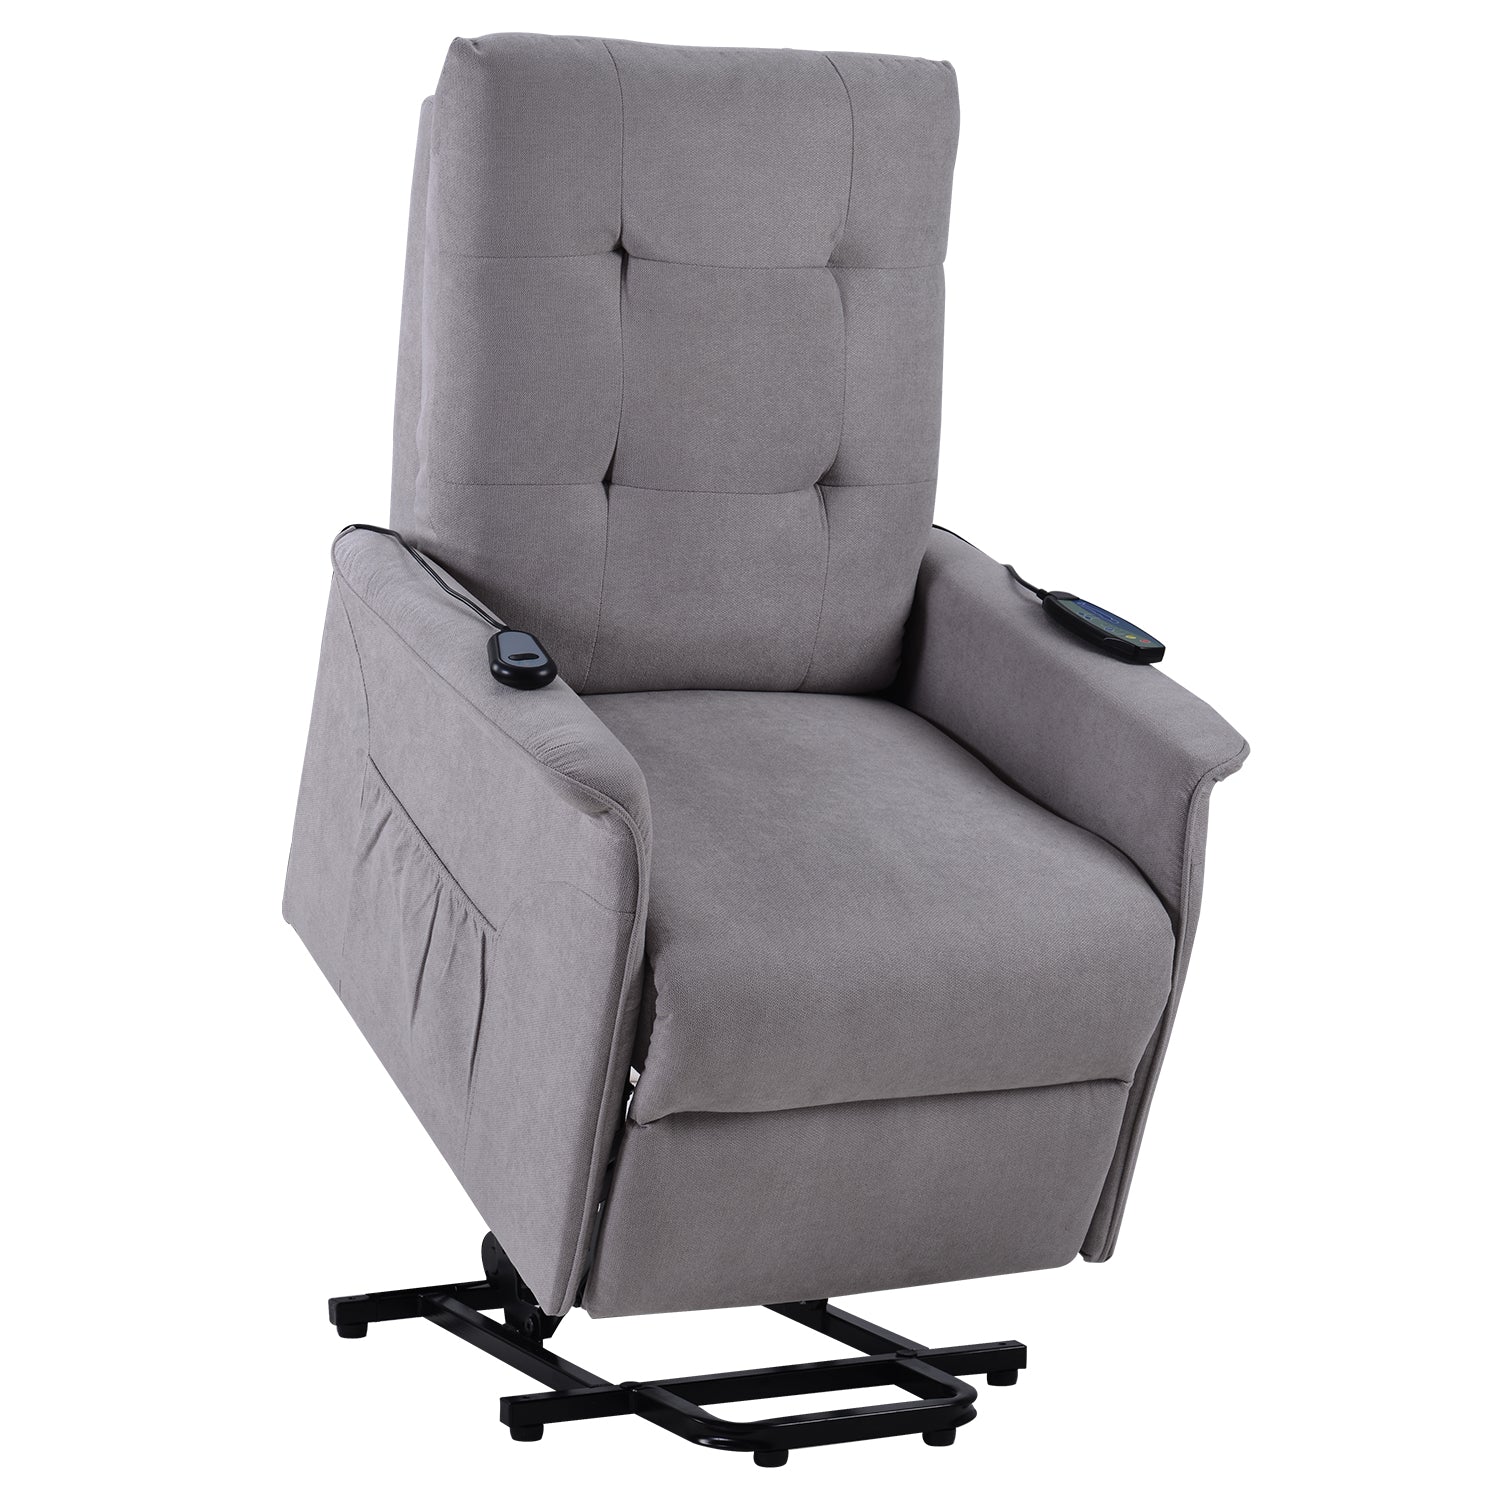 Power Lift Chair for Elderly with Adjustable Massage Function Recliner Chair-Boyel Living